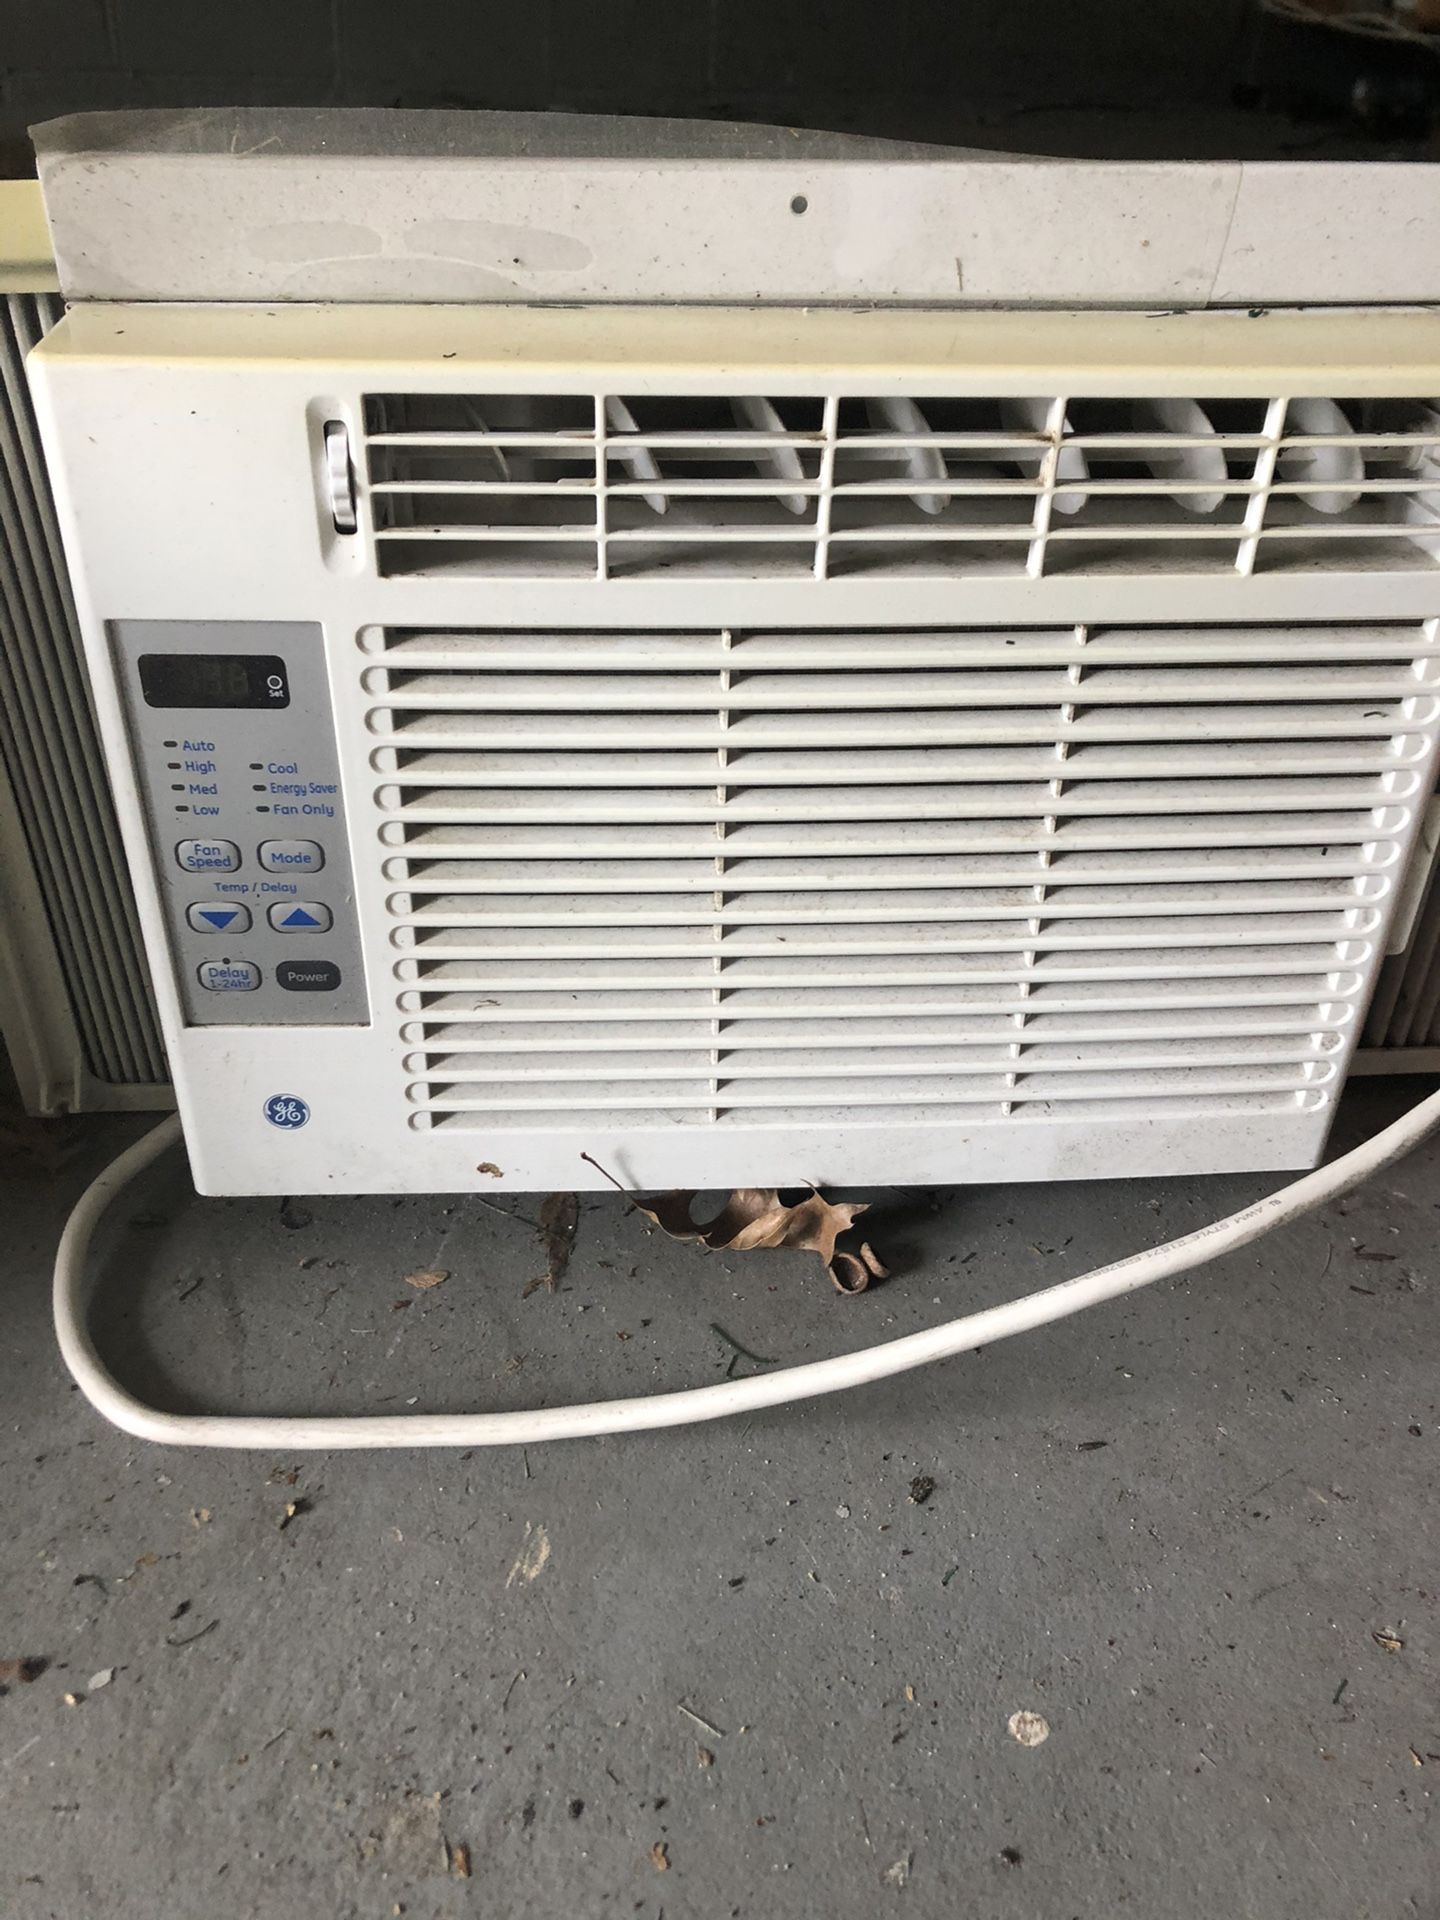 Window air conditioner is in good condition and will make any room cold. This is a must have especially with the hot months ahead